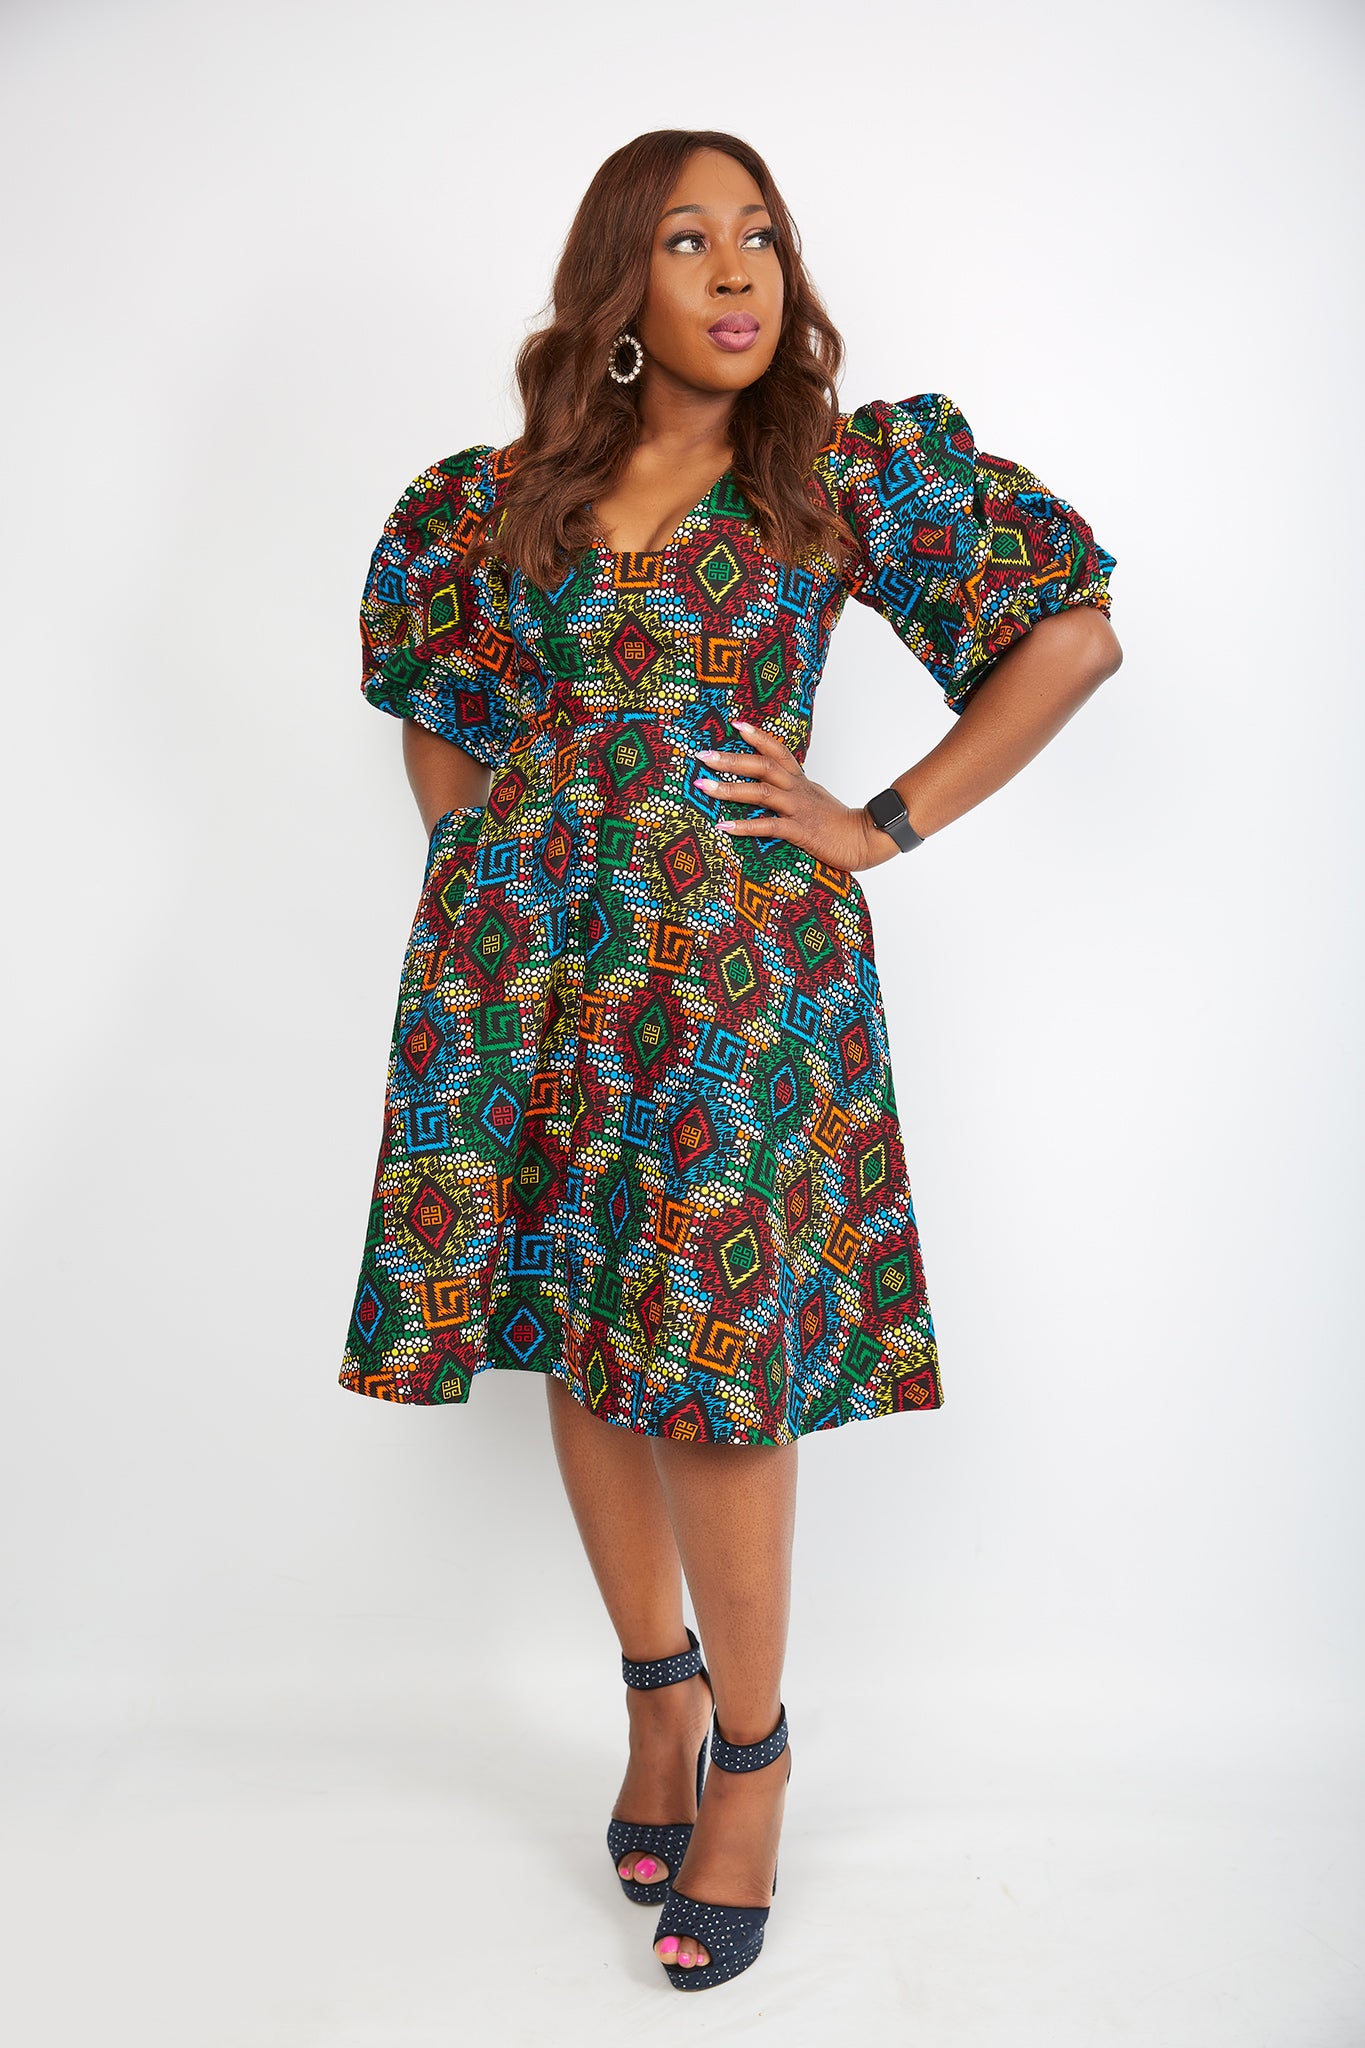 African dress for plus size women | African print clothing in the UK | Ready to wear African print outfits | African dress styles | African clothing | african outfit | kitenge dresses | Africa Dresses for Women | Ankara Styles for ladies | African dresses for work | Danshiki Dress|Ghana African dress | Kente Dress | African dress | African print Dress | African Clothing Online Shop | Short African dress | Mini African dress UK | African dress UK